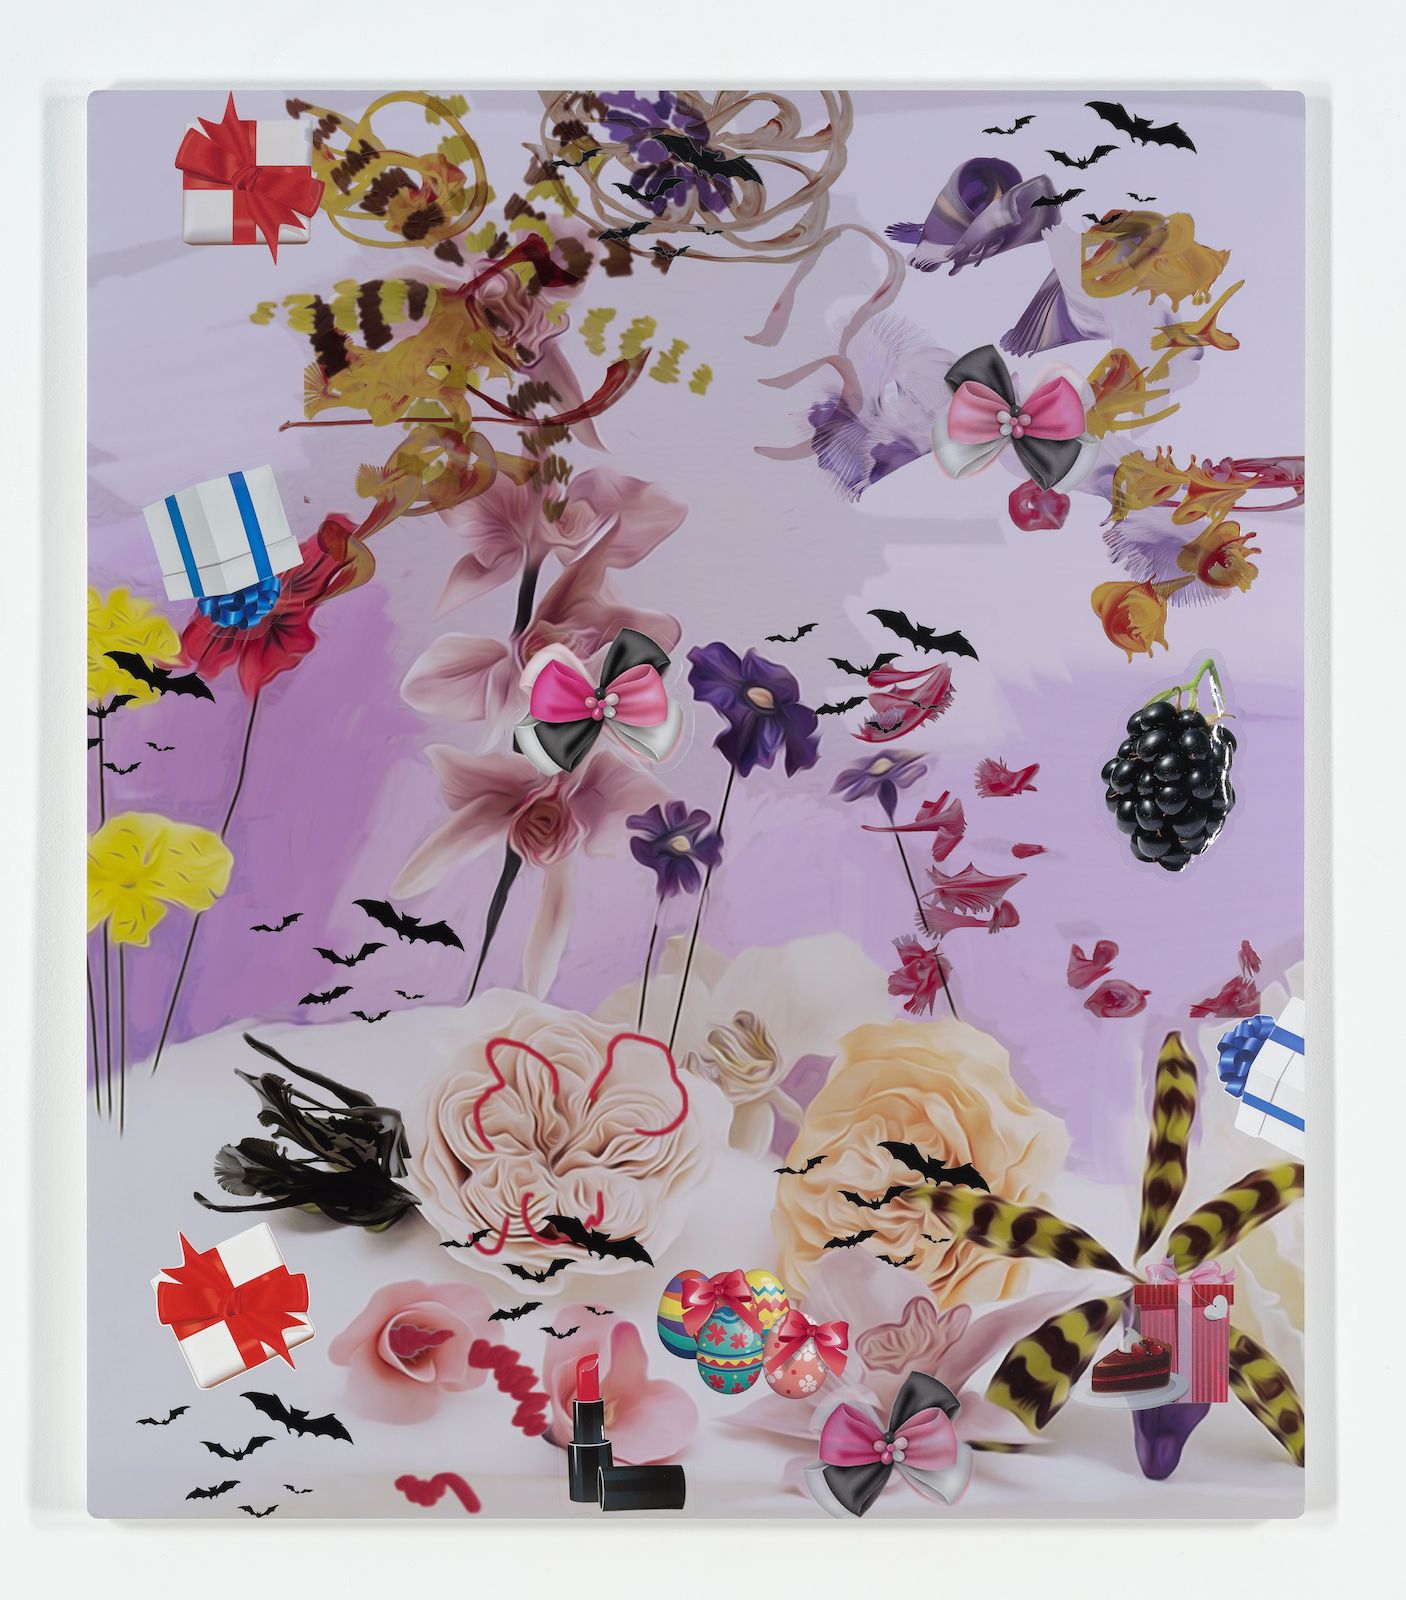 Petra Cortright, let's go+kick.rom, 2015, digital painting, duraflex, 3D print, UV print and stickers, mounted on acrylic, 49 × 42 × 1 in.